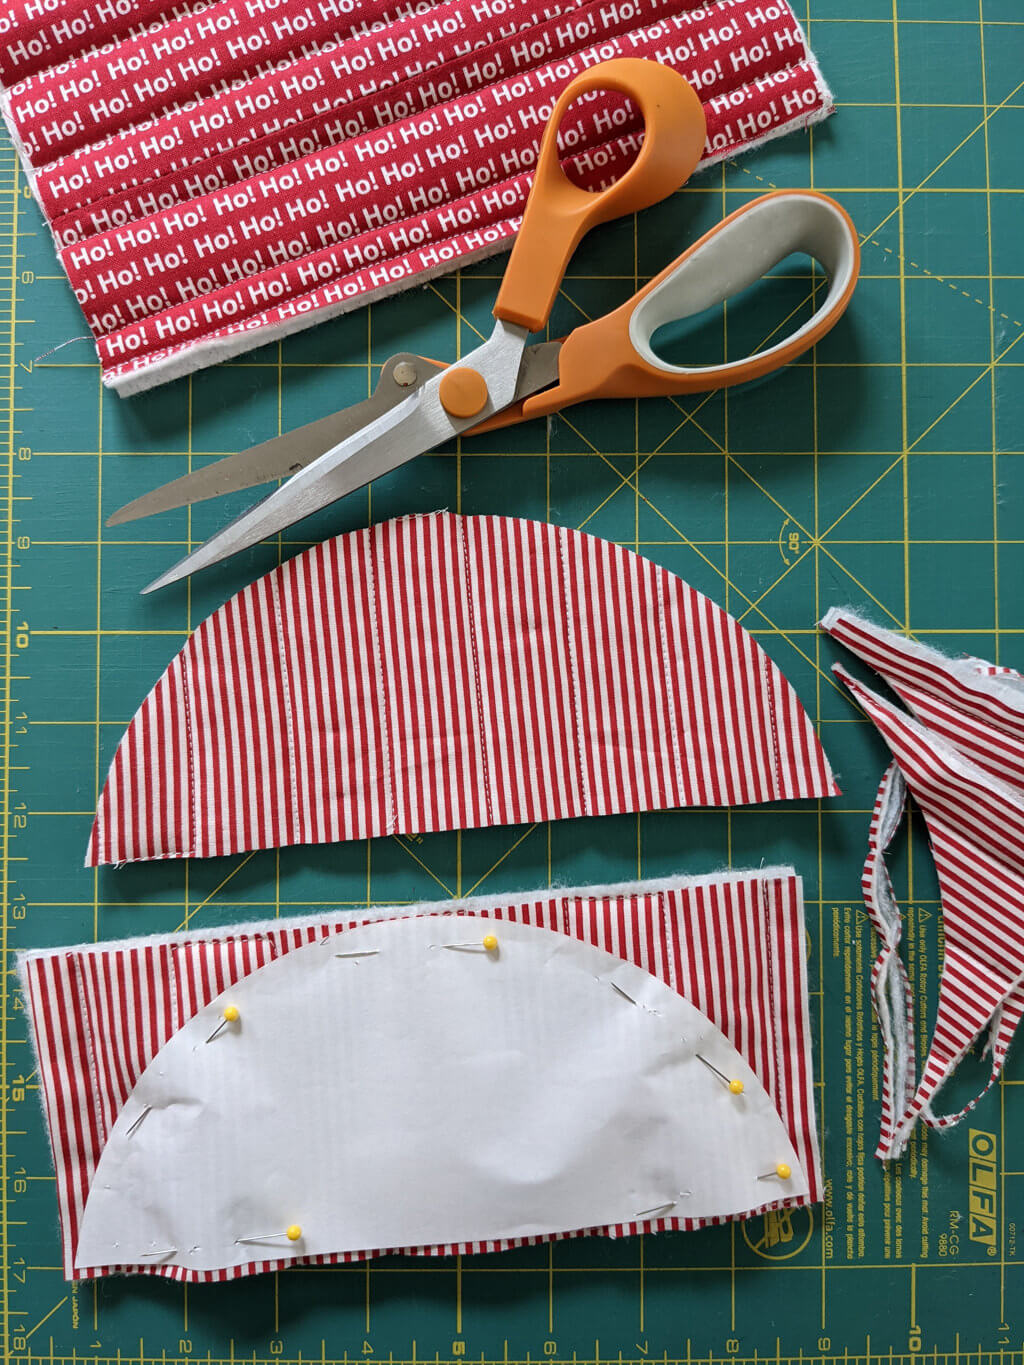 Cutting quilted potholder pattern pieces